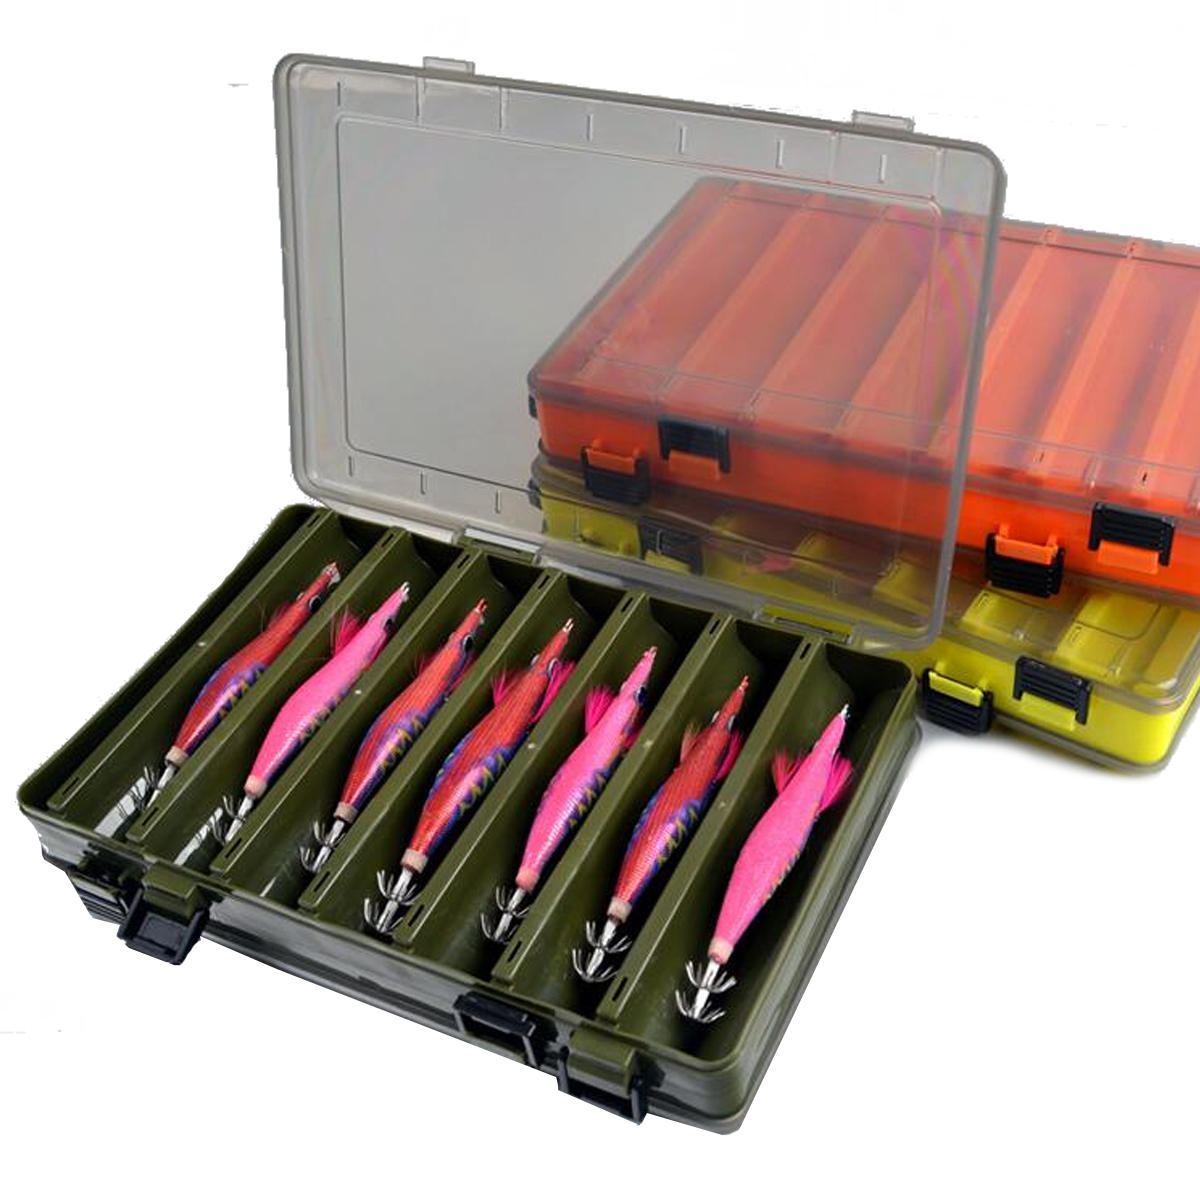 Fishing Bait Case Tackle Storage Box, Fishing Lure Storage Container